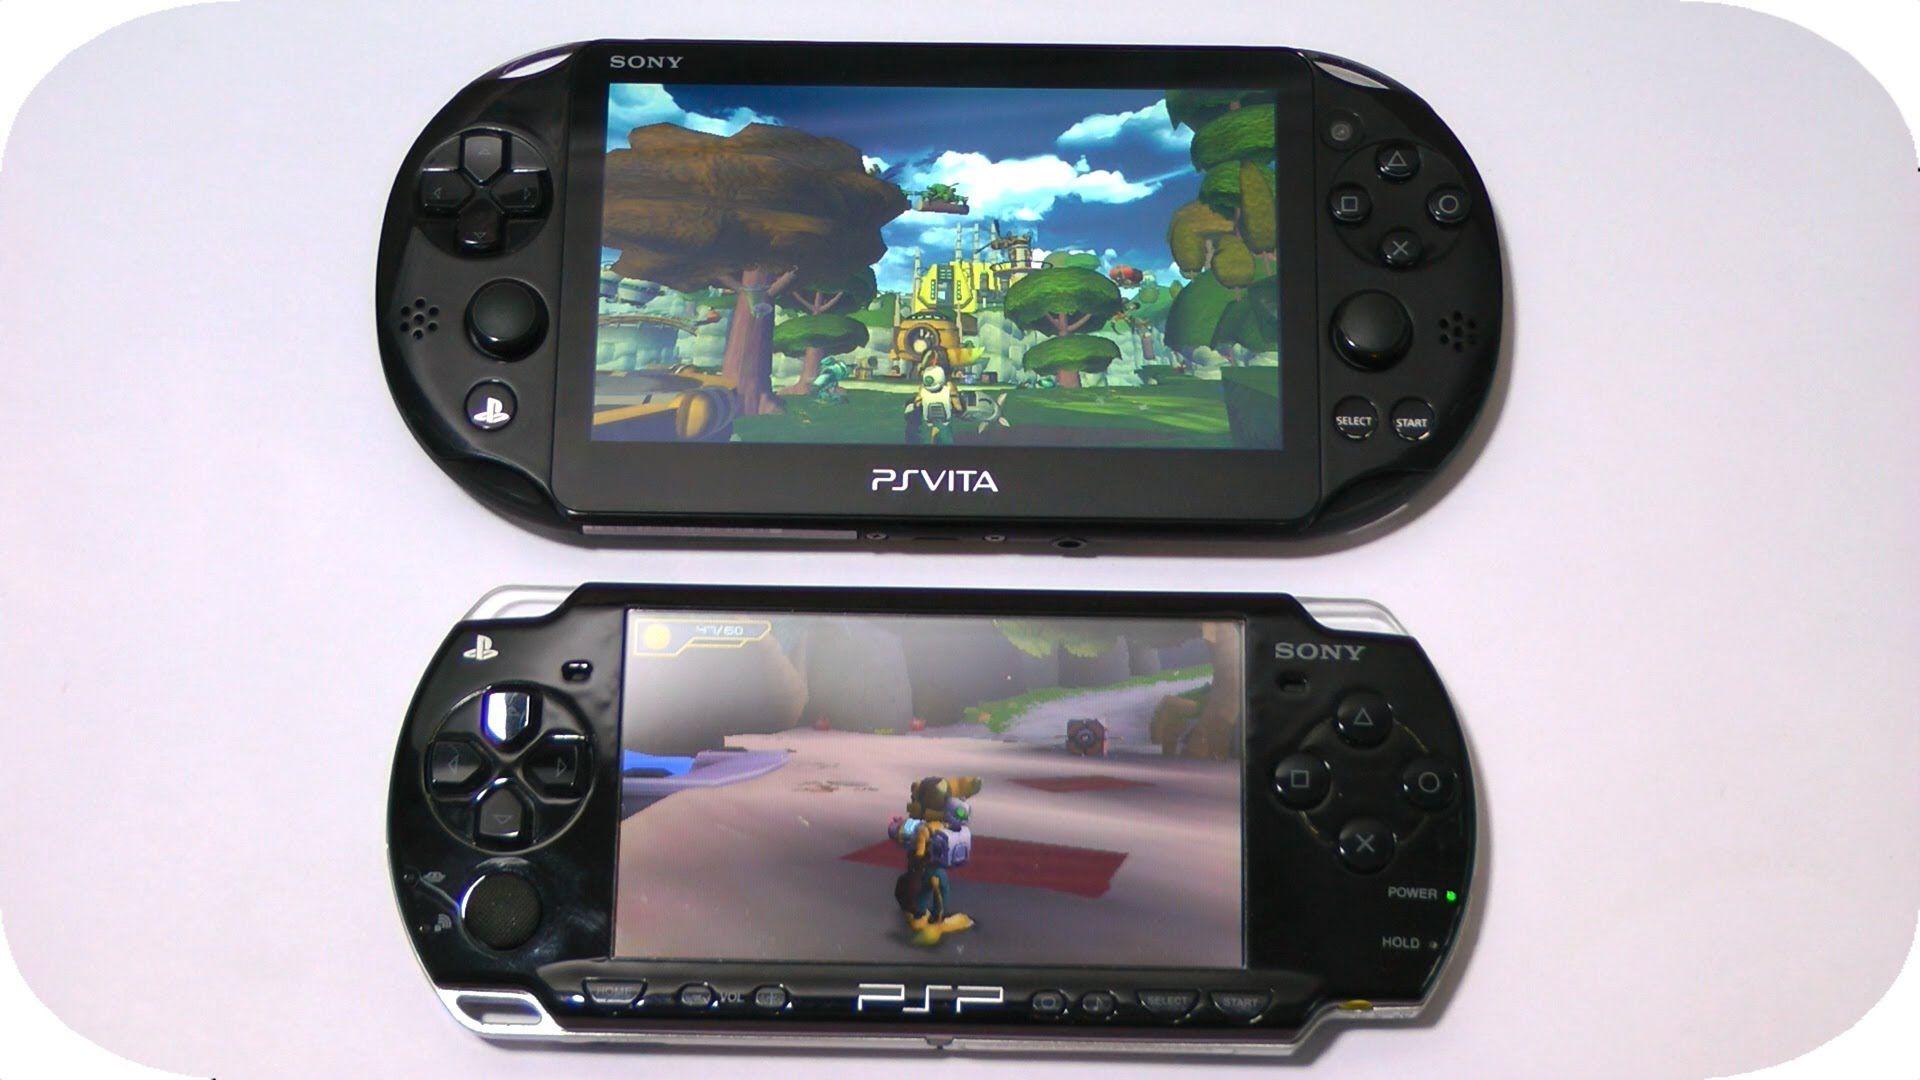 PS Vita Ratchet and Clank Trilogy vs. PSP Ratchet and Clank Size